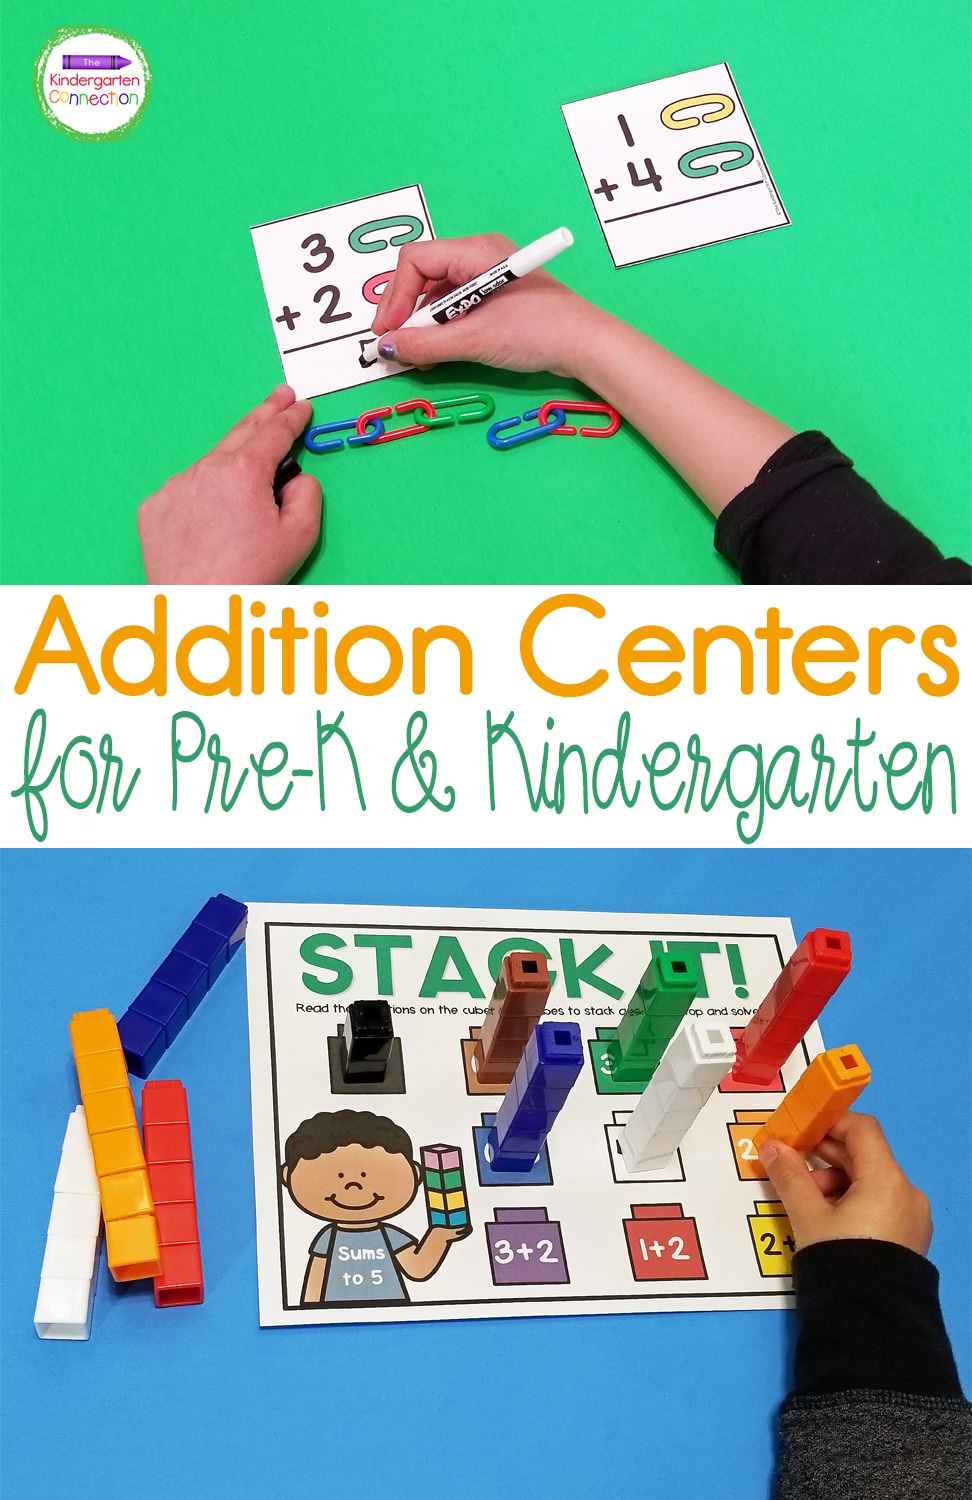 Grab these Addition Activities and Centers for Pre-K and Kindergarten for some engaging, hands-on learning fun in the classroom!